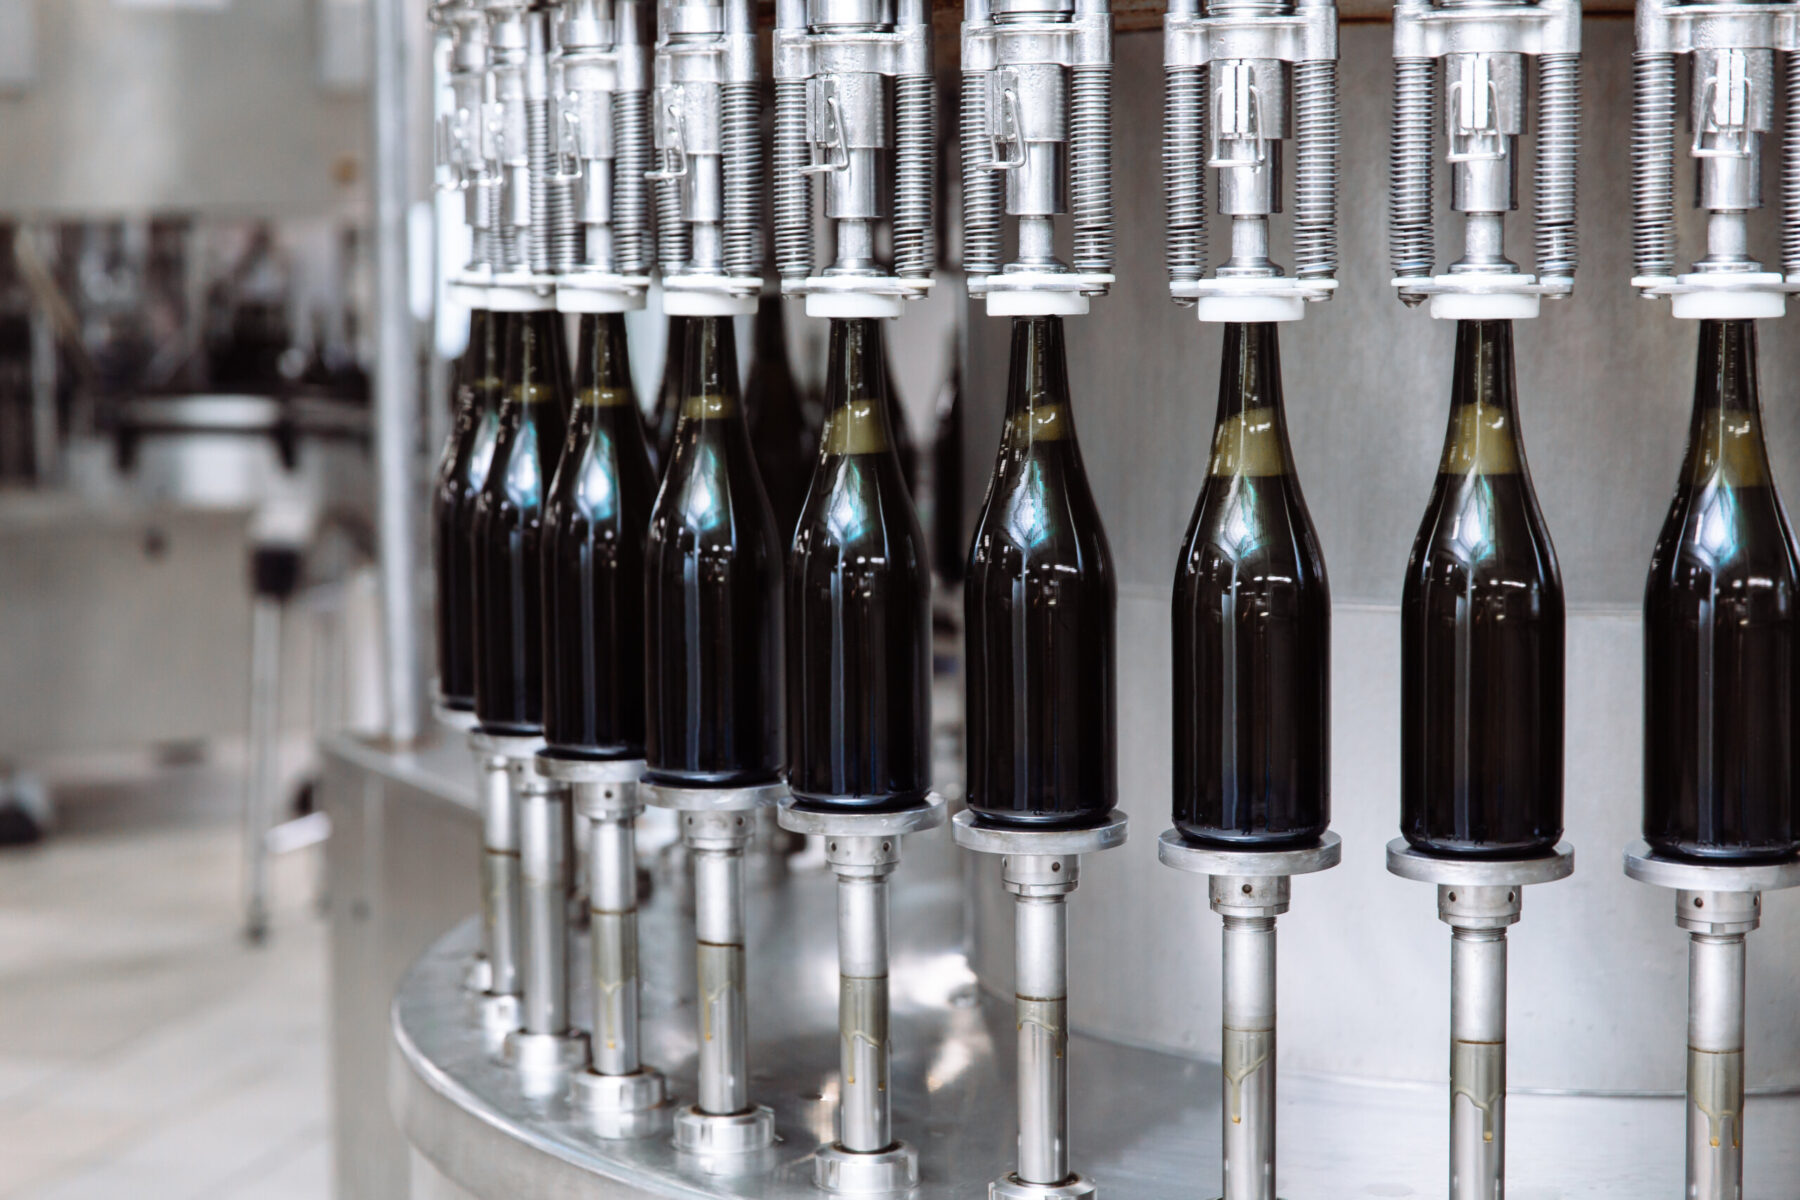 A glass bottling filling line with dark brown glass bottles being filled prior to capping